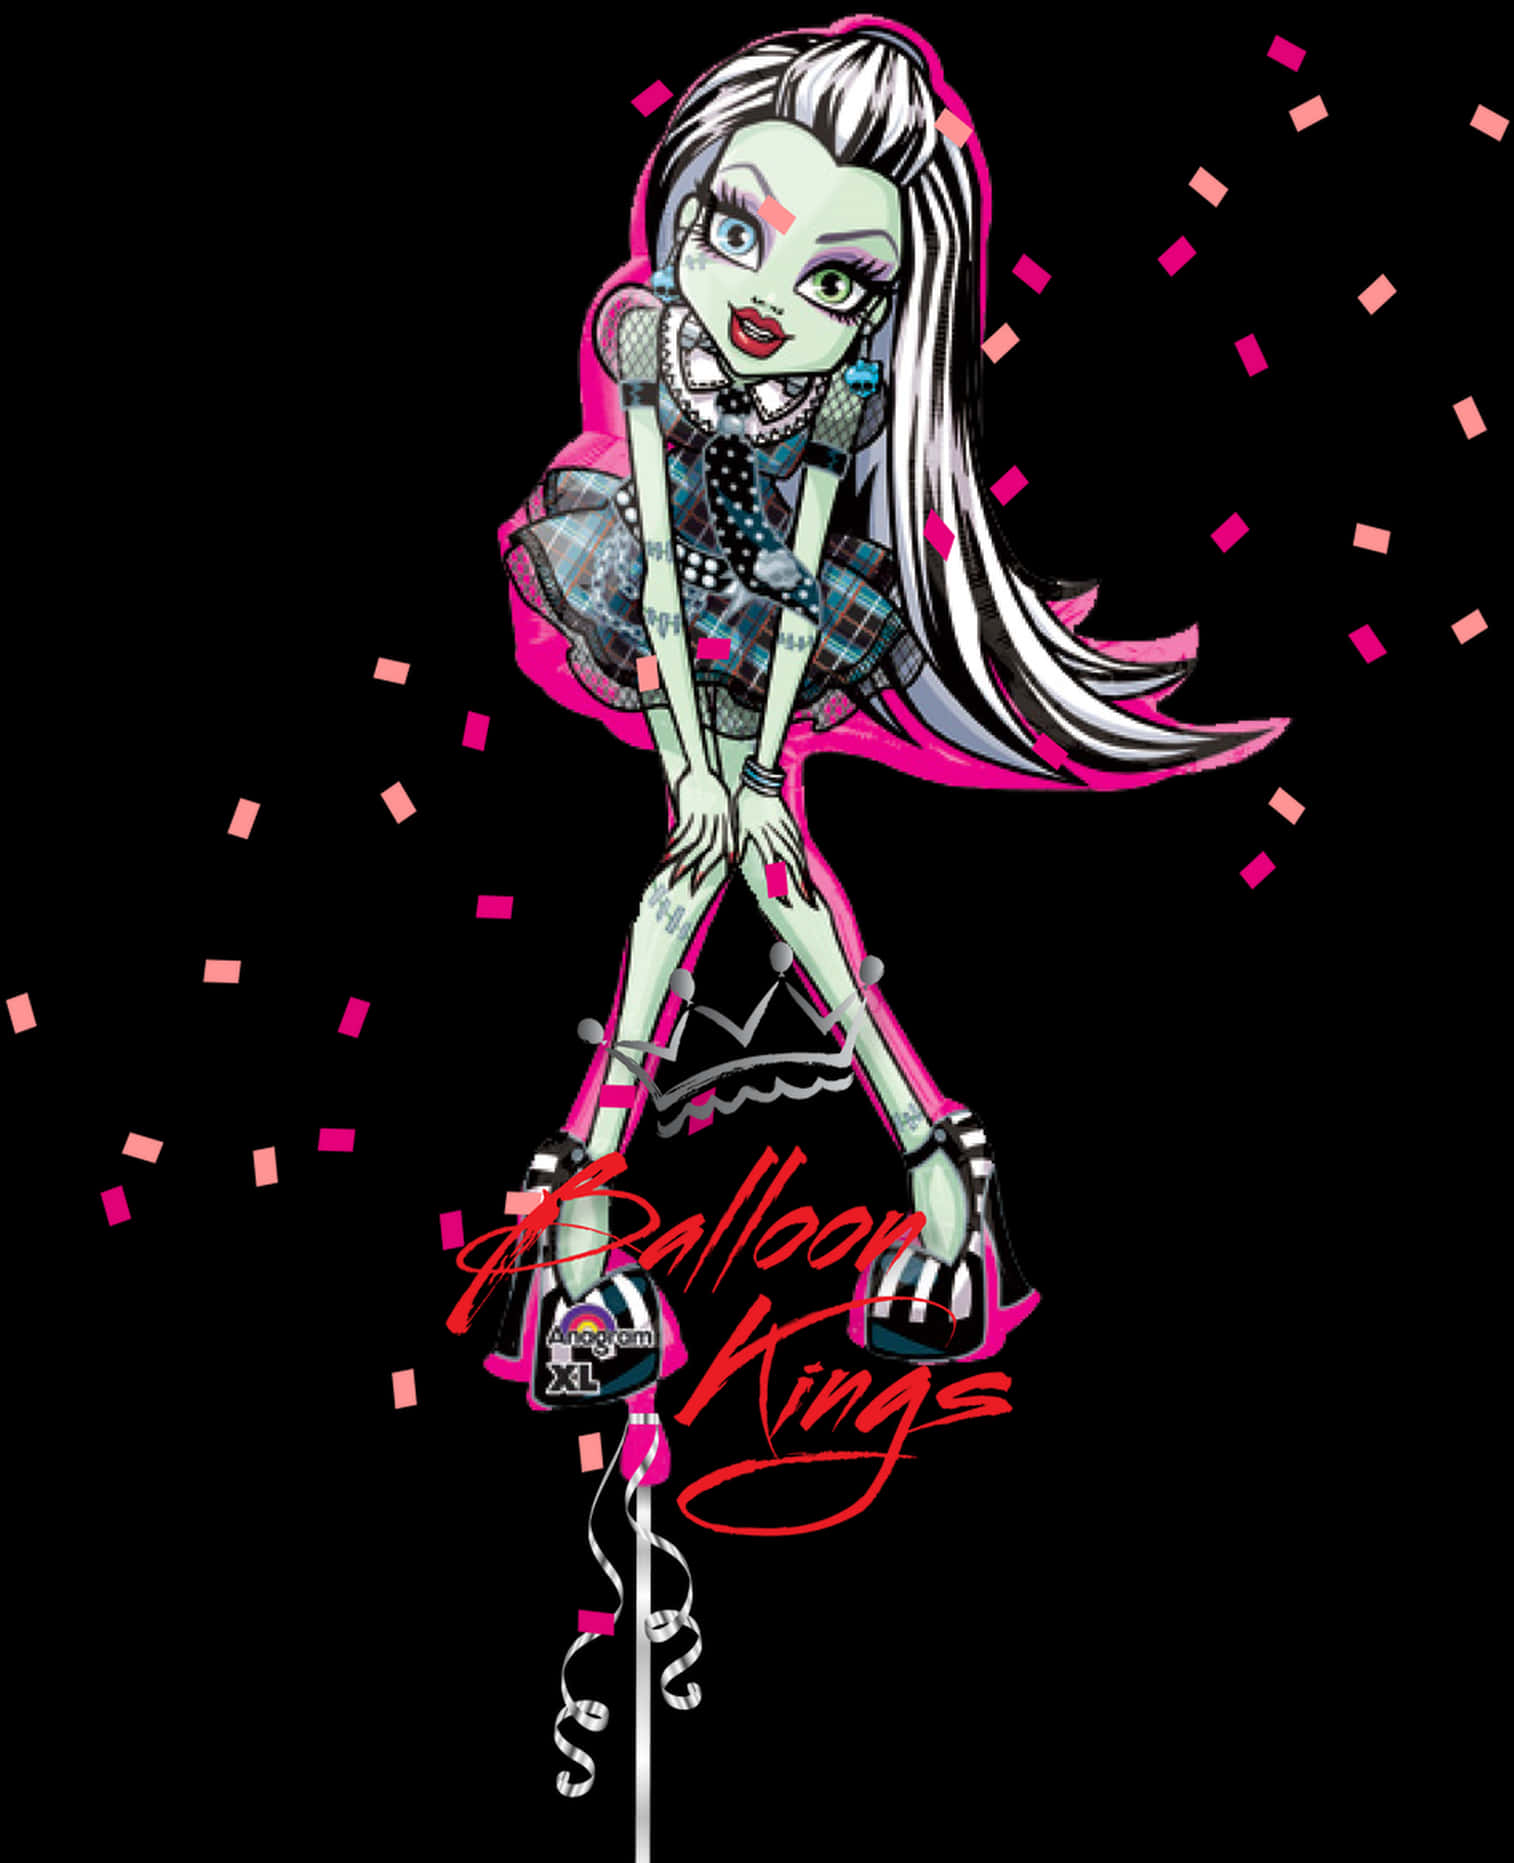 Monster High Character With Balloon Wings PNG